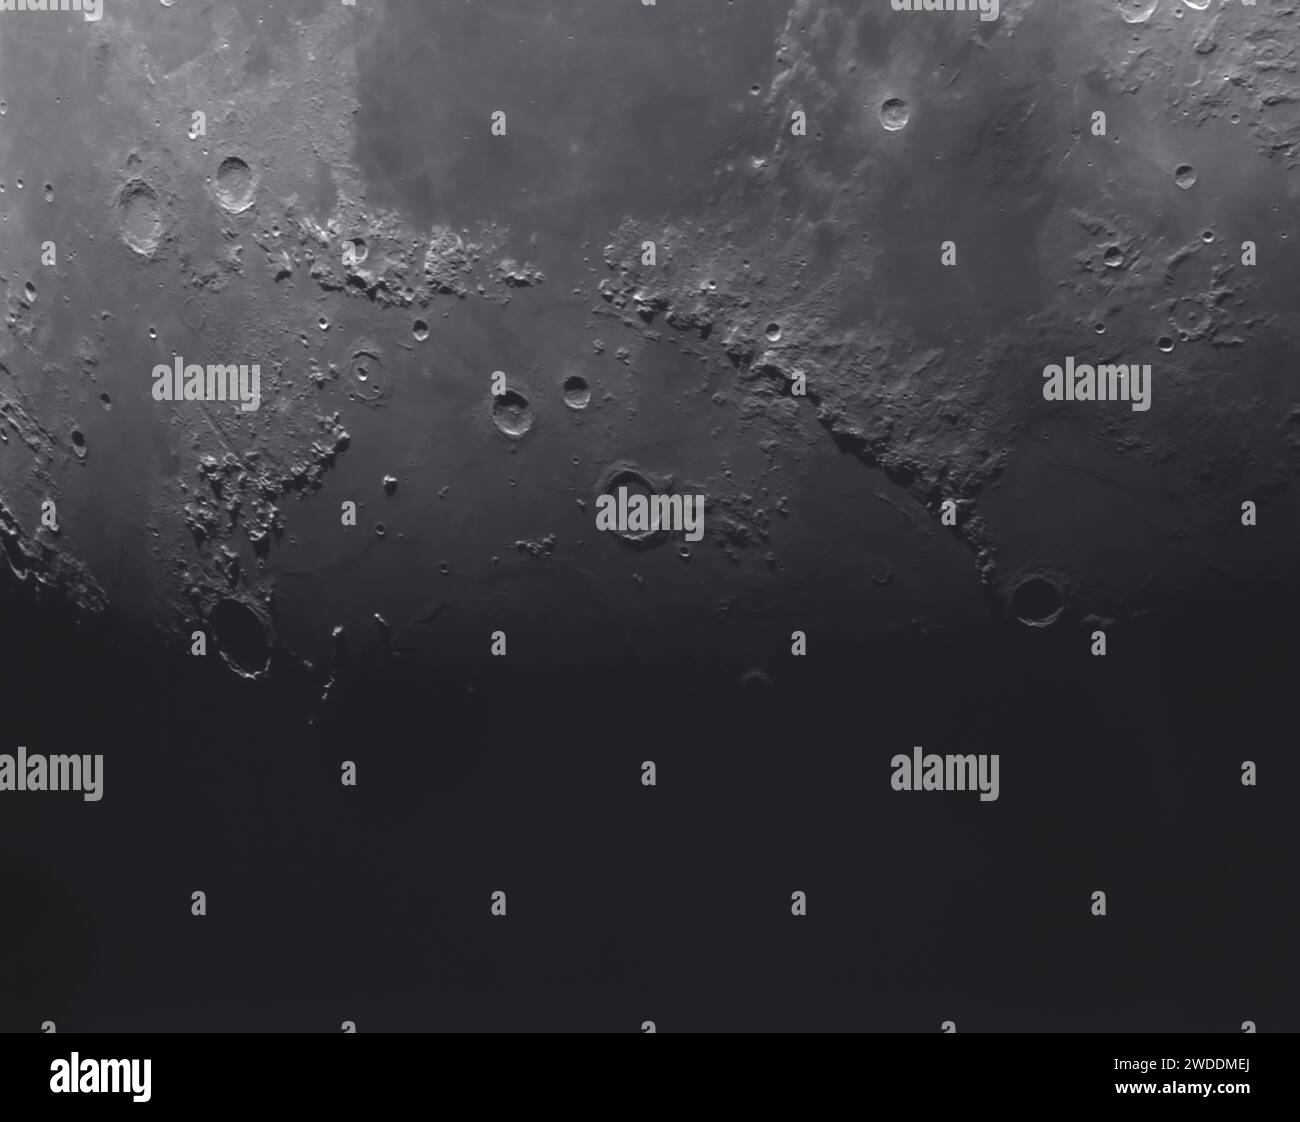 The Mare Imbrium partially in deep shadow, Apennine mountains on the Moon (centre right), and Lunar Alp mountains (centre left) ending in the crater Plato (centre left in deep shadow). Stock Photo